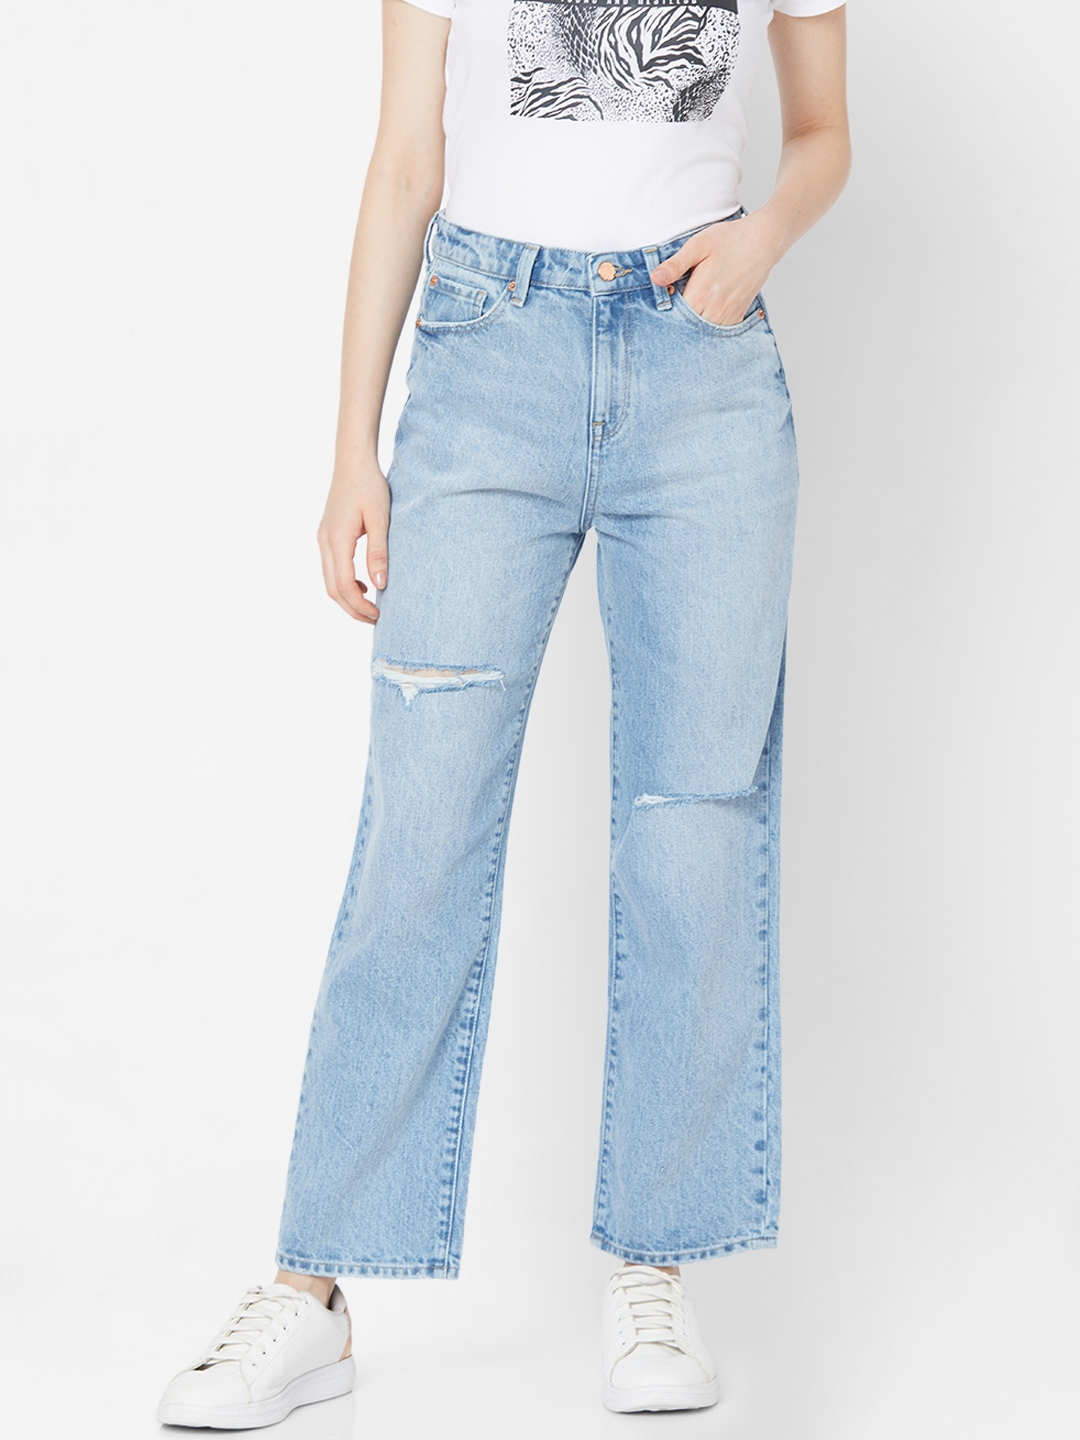 Women's Blue Cotton Solid Ripped Jeans